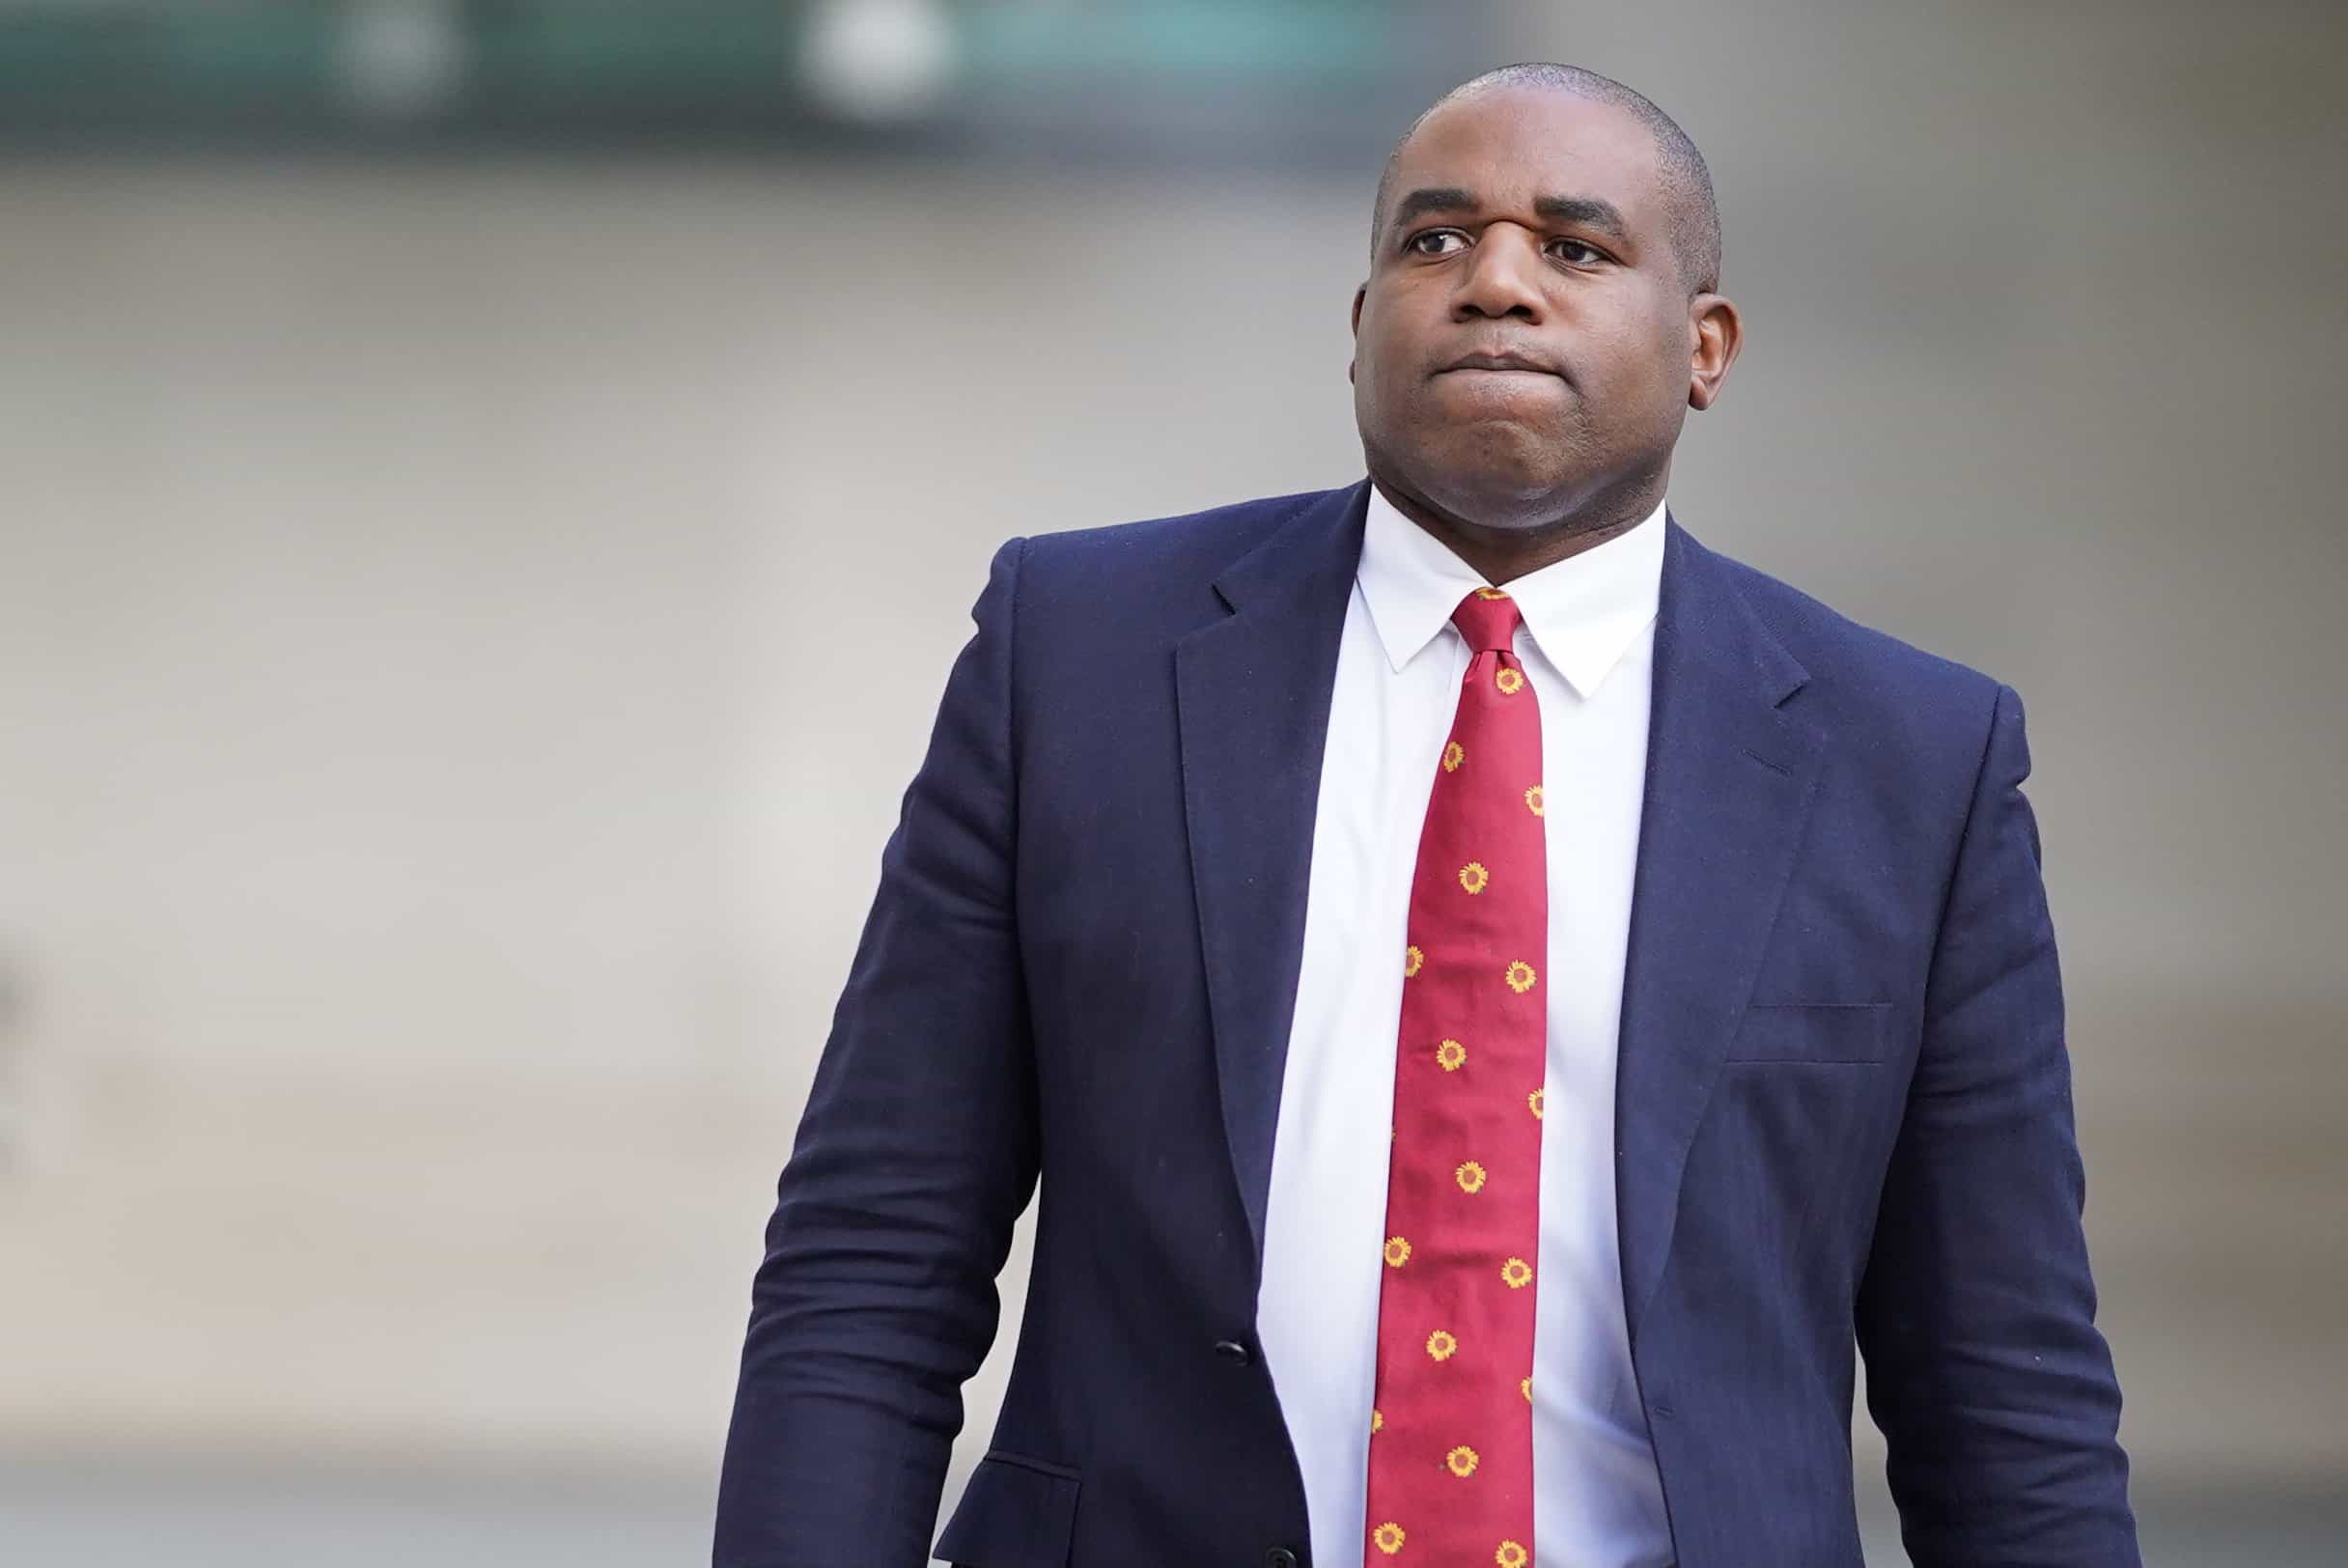 David Lammy says Margaret Thatcher was a ‘visionary’